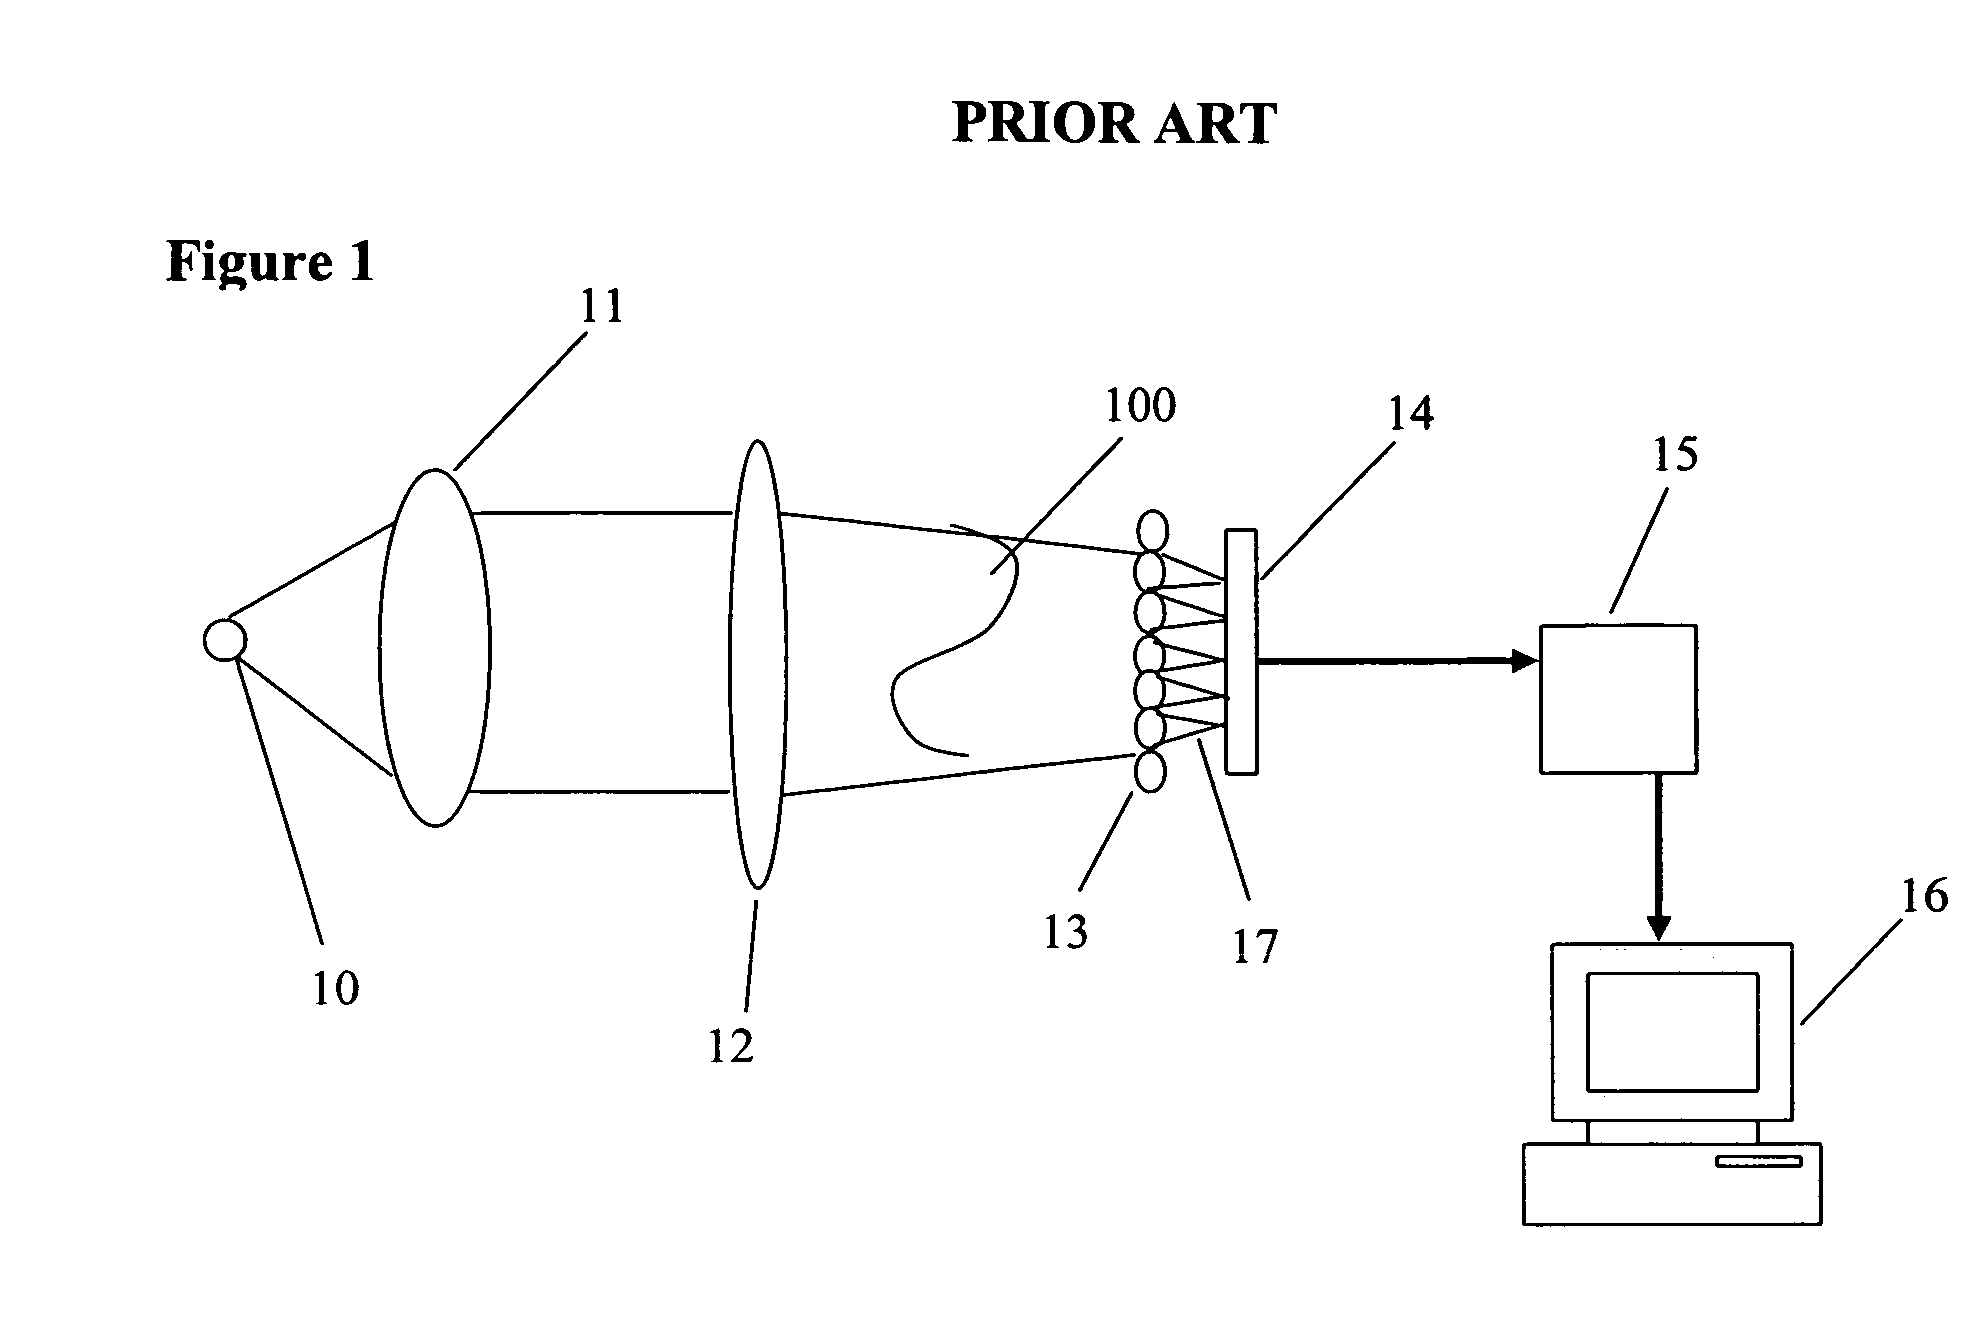 Apparatus and method for optical wavefront analysis using active light modulation